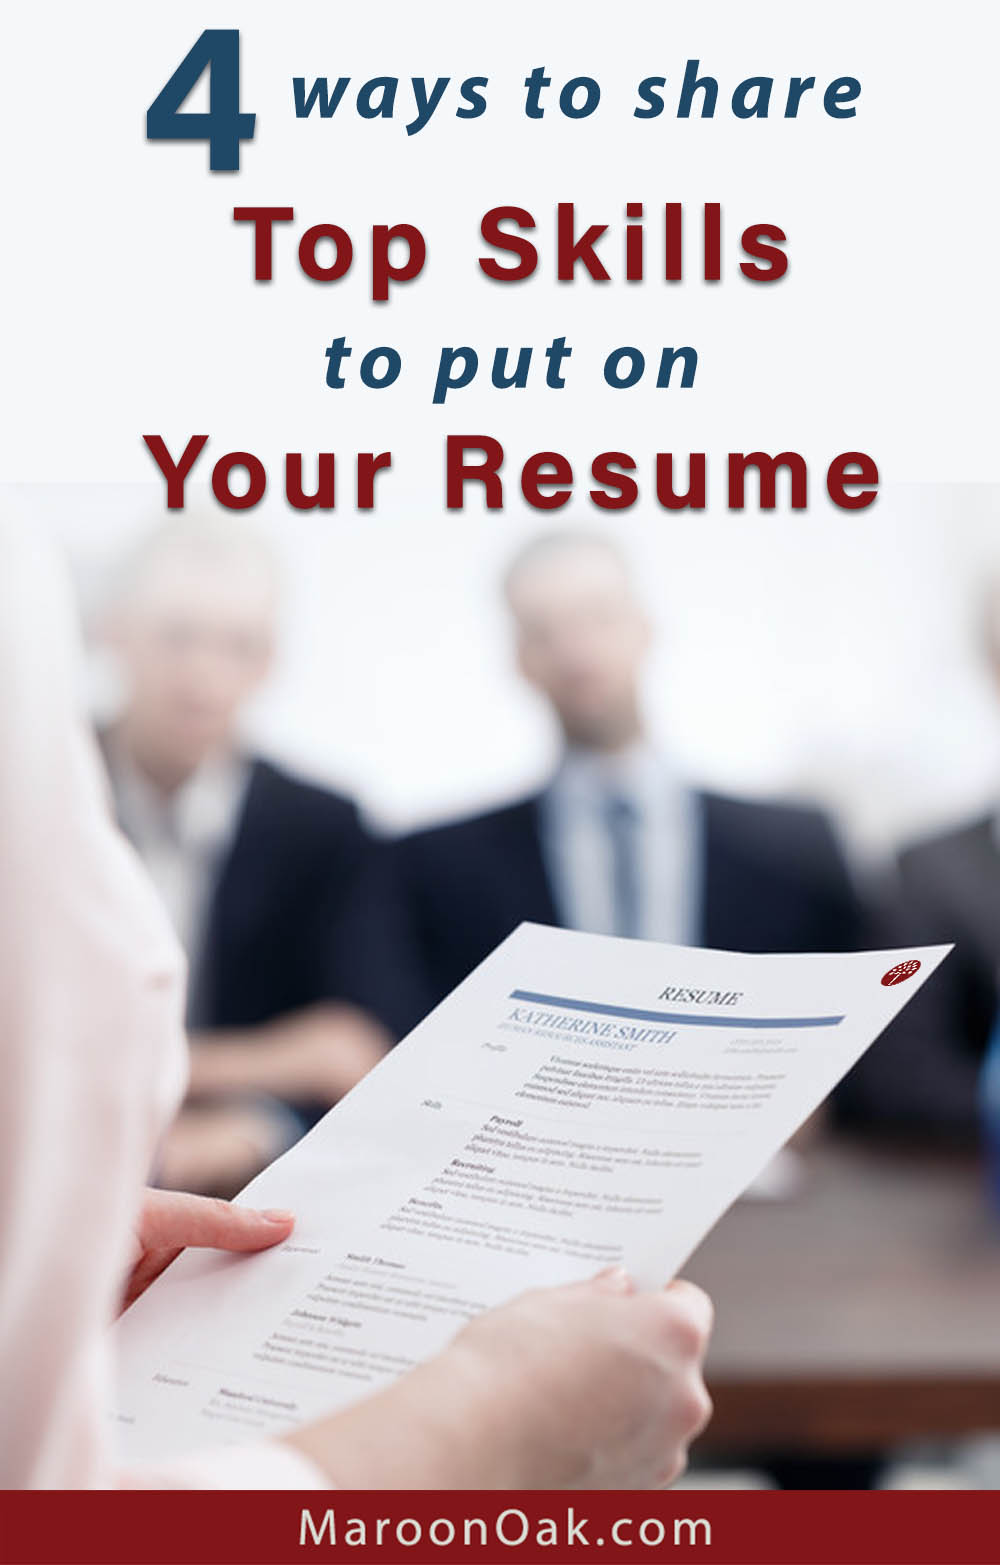 Get that job. Communicate your worth clearly on your Resume, CV, Portfolio & LinkedIn. Show your professional skills & soft skills when you're #jobhunting. Plus, lots of resume skill examples.